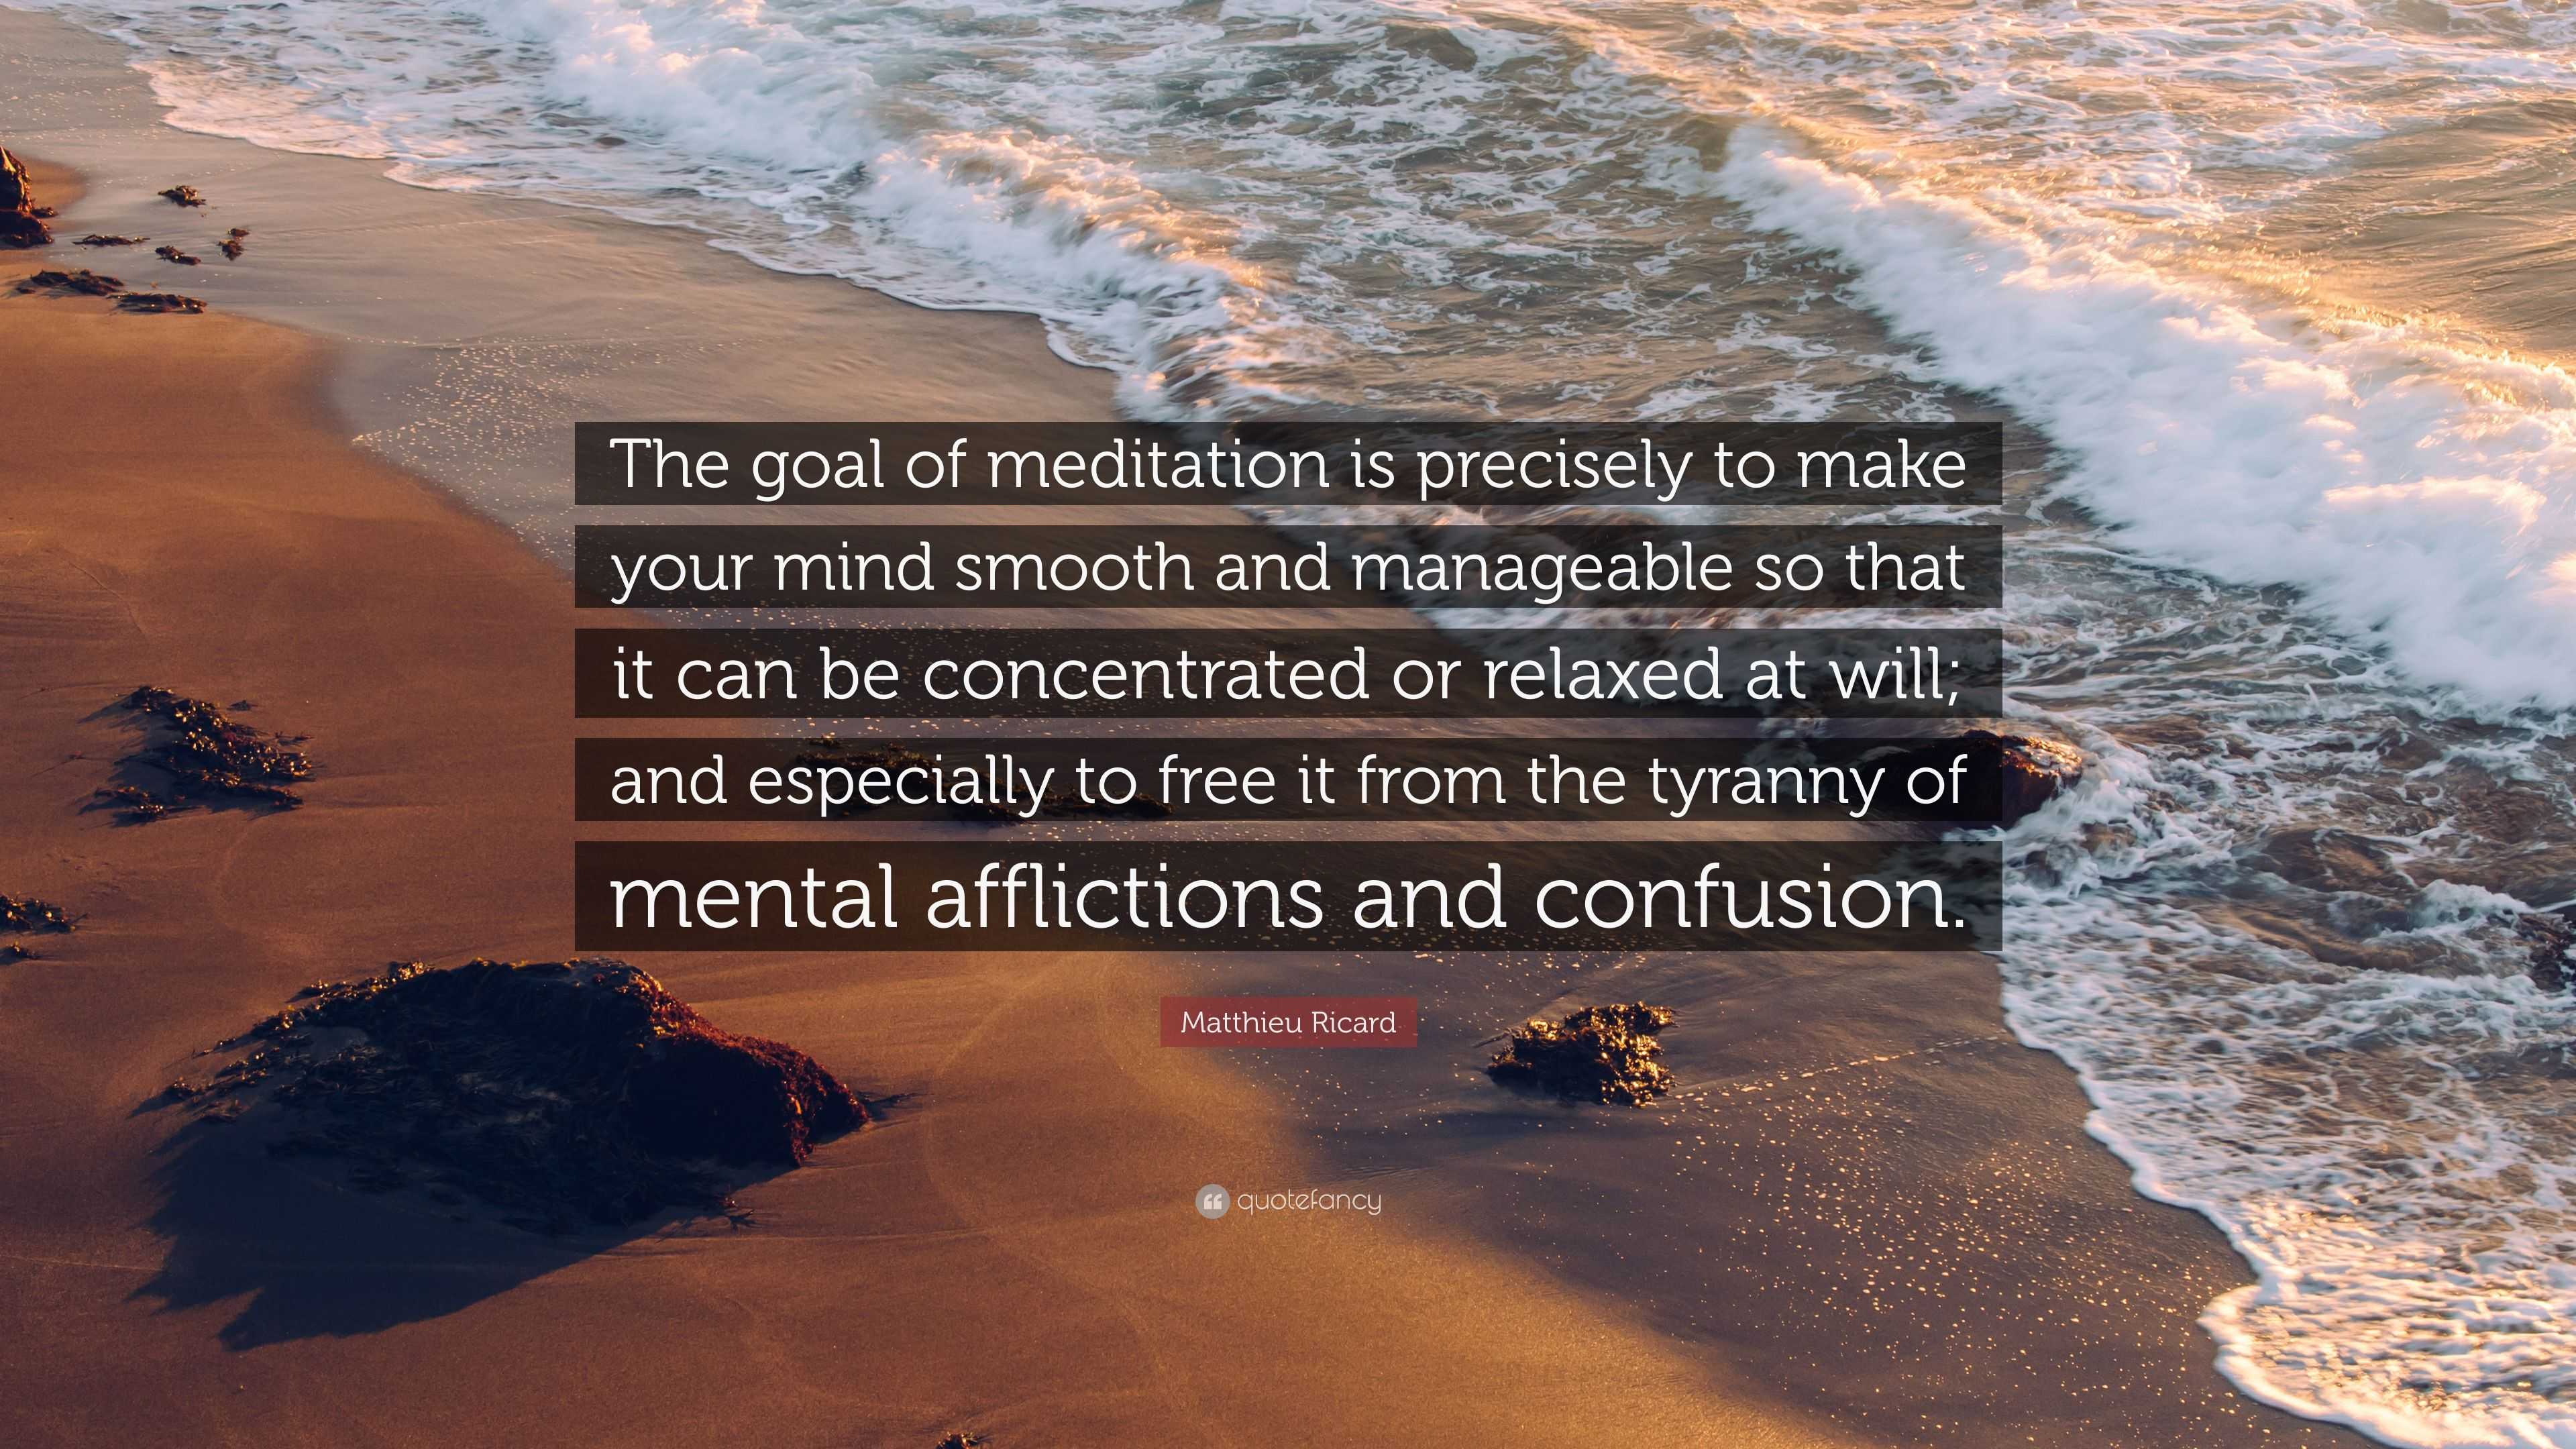 what is the goal of meditation